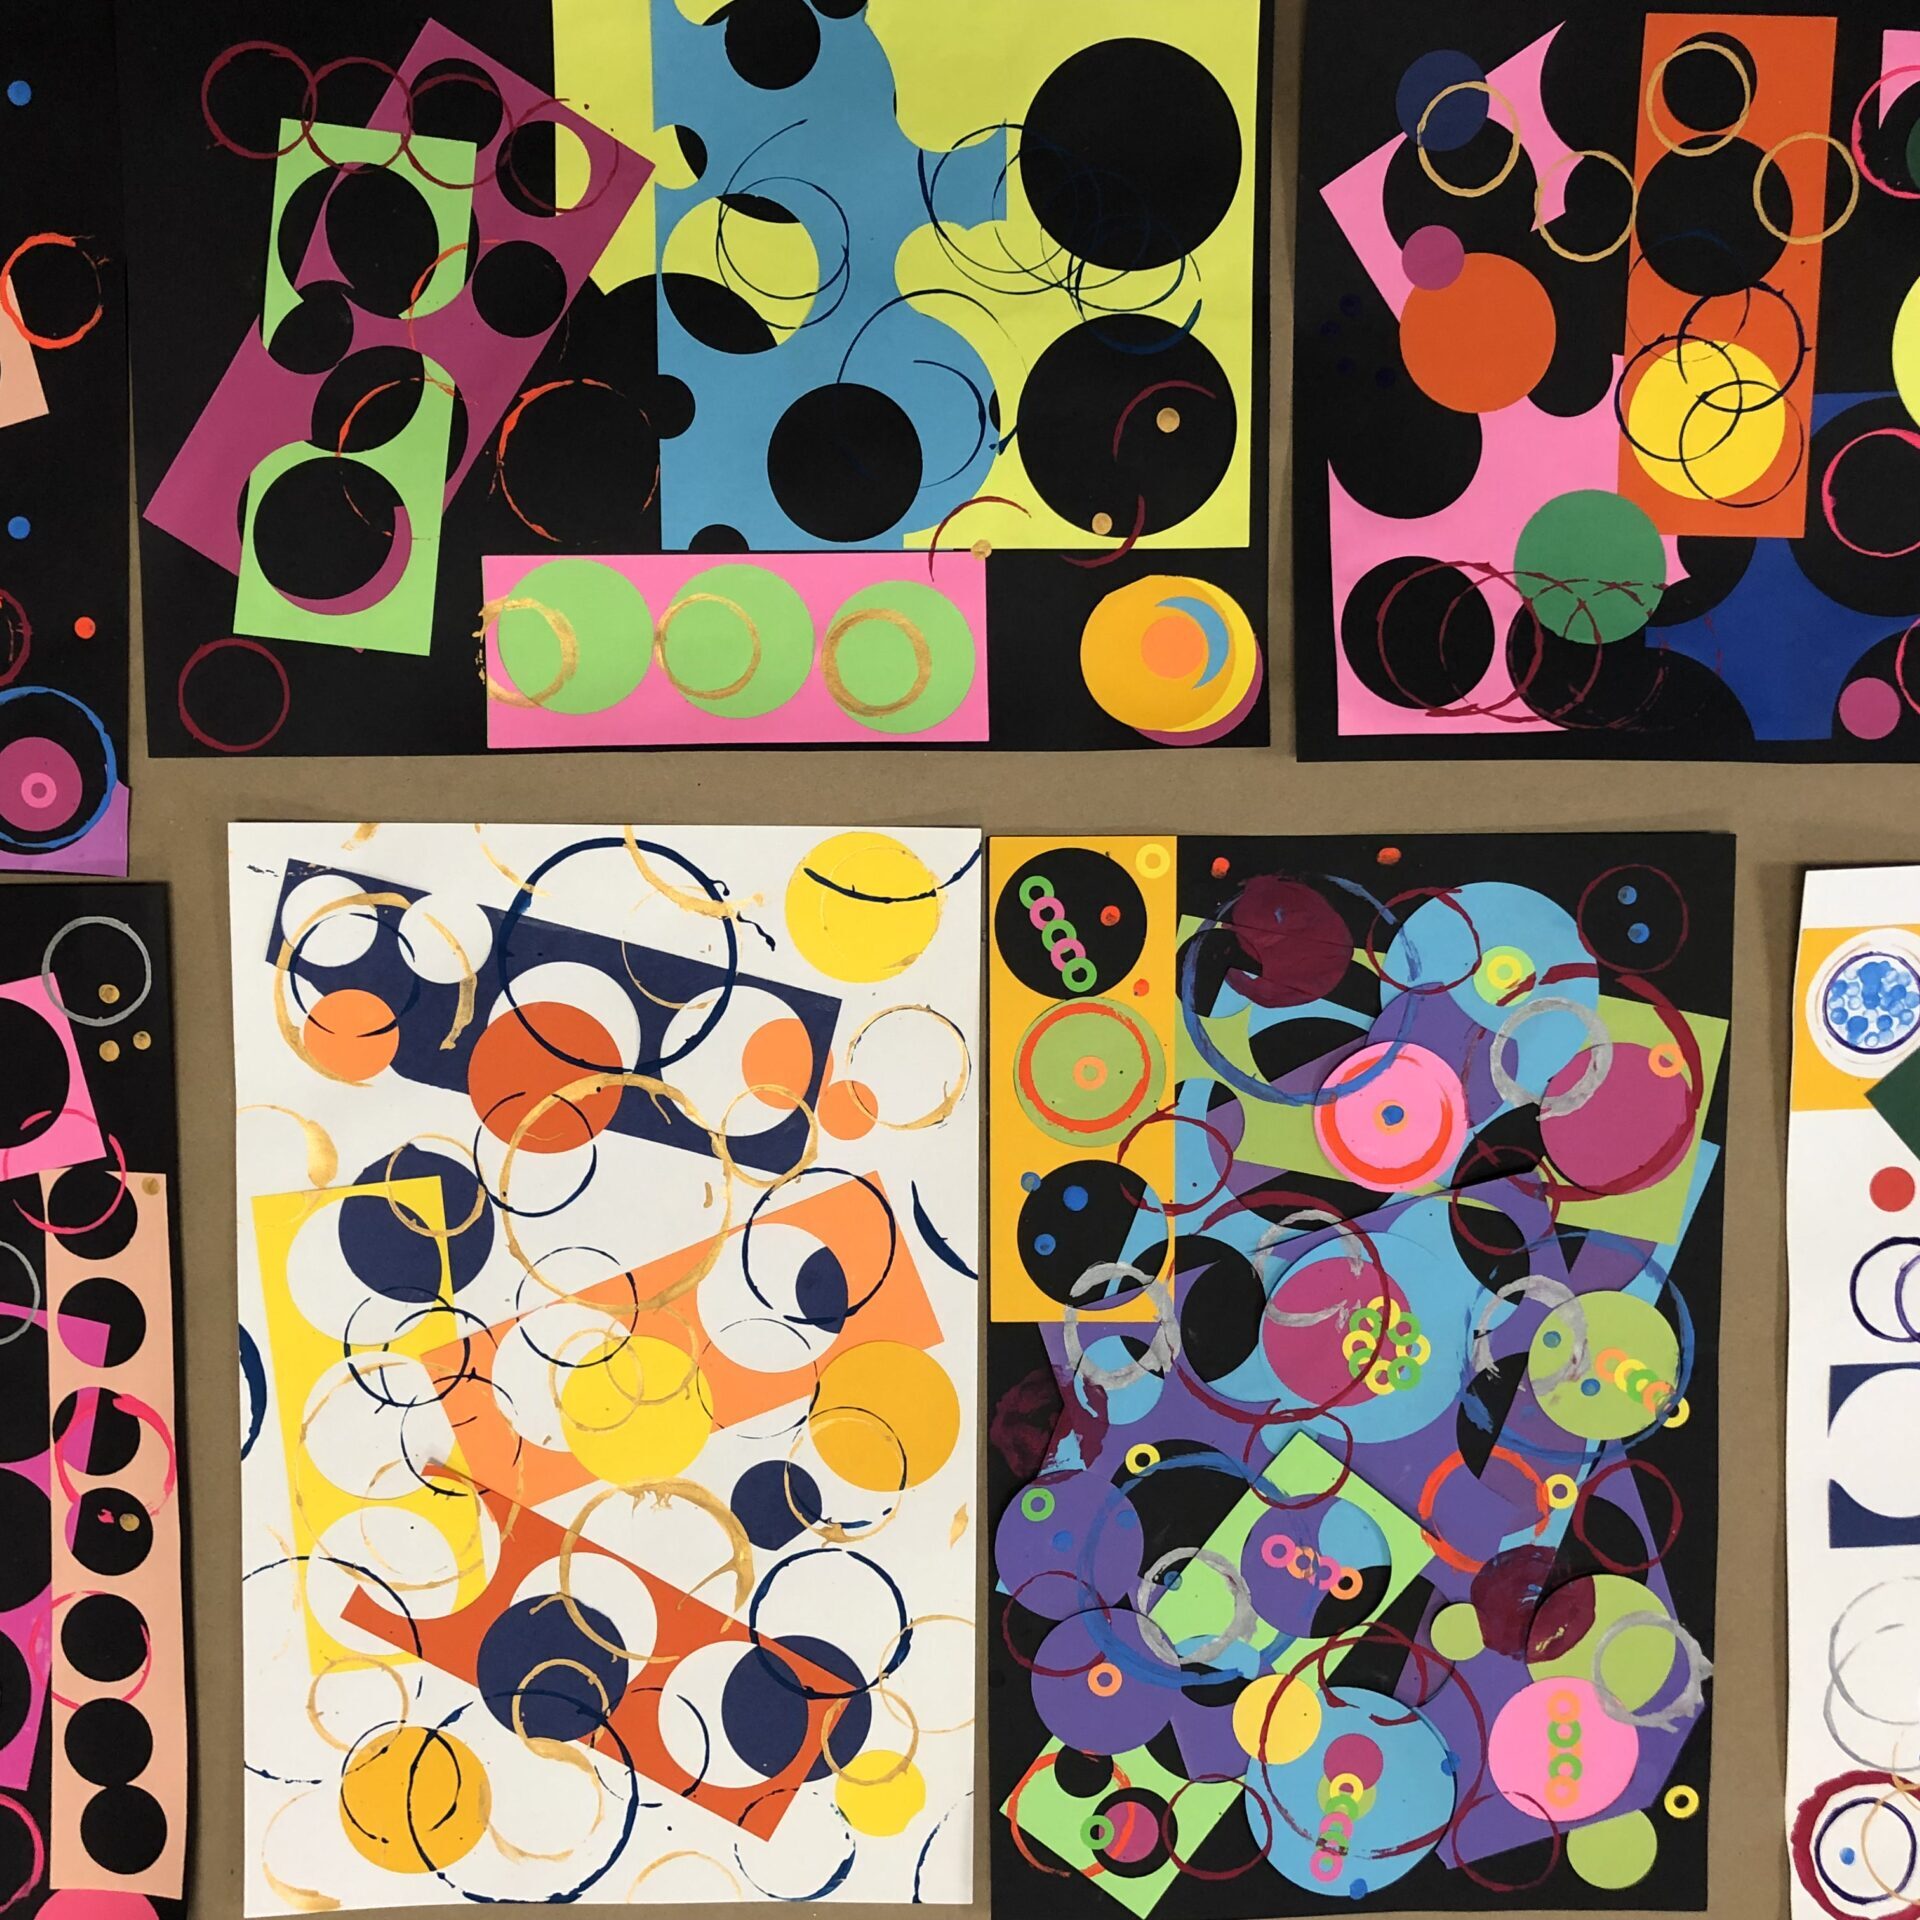 Collage and paint artworks featuring circular shapes.